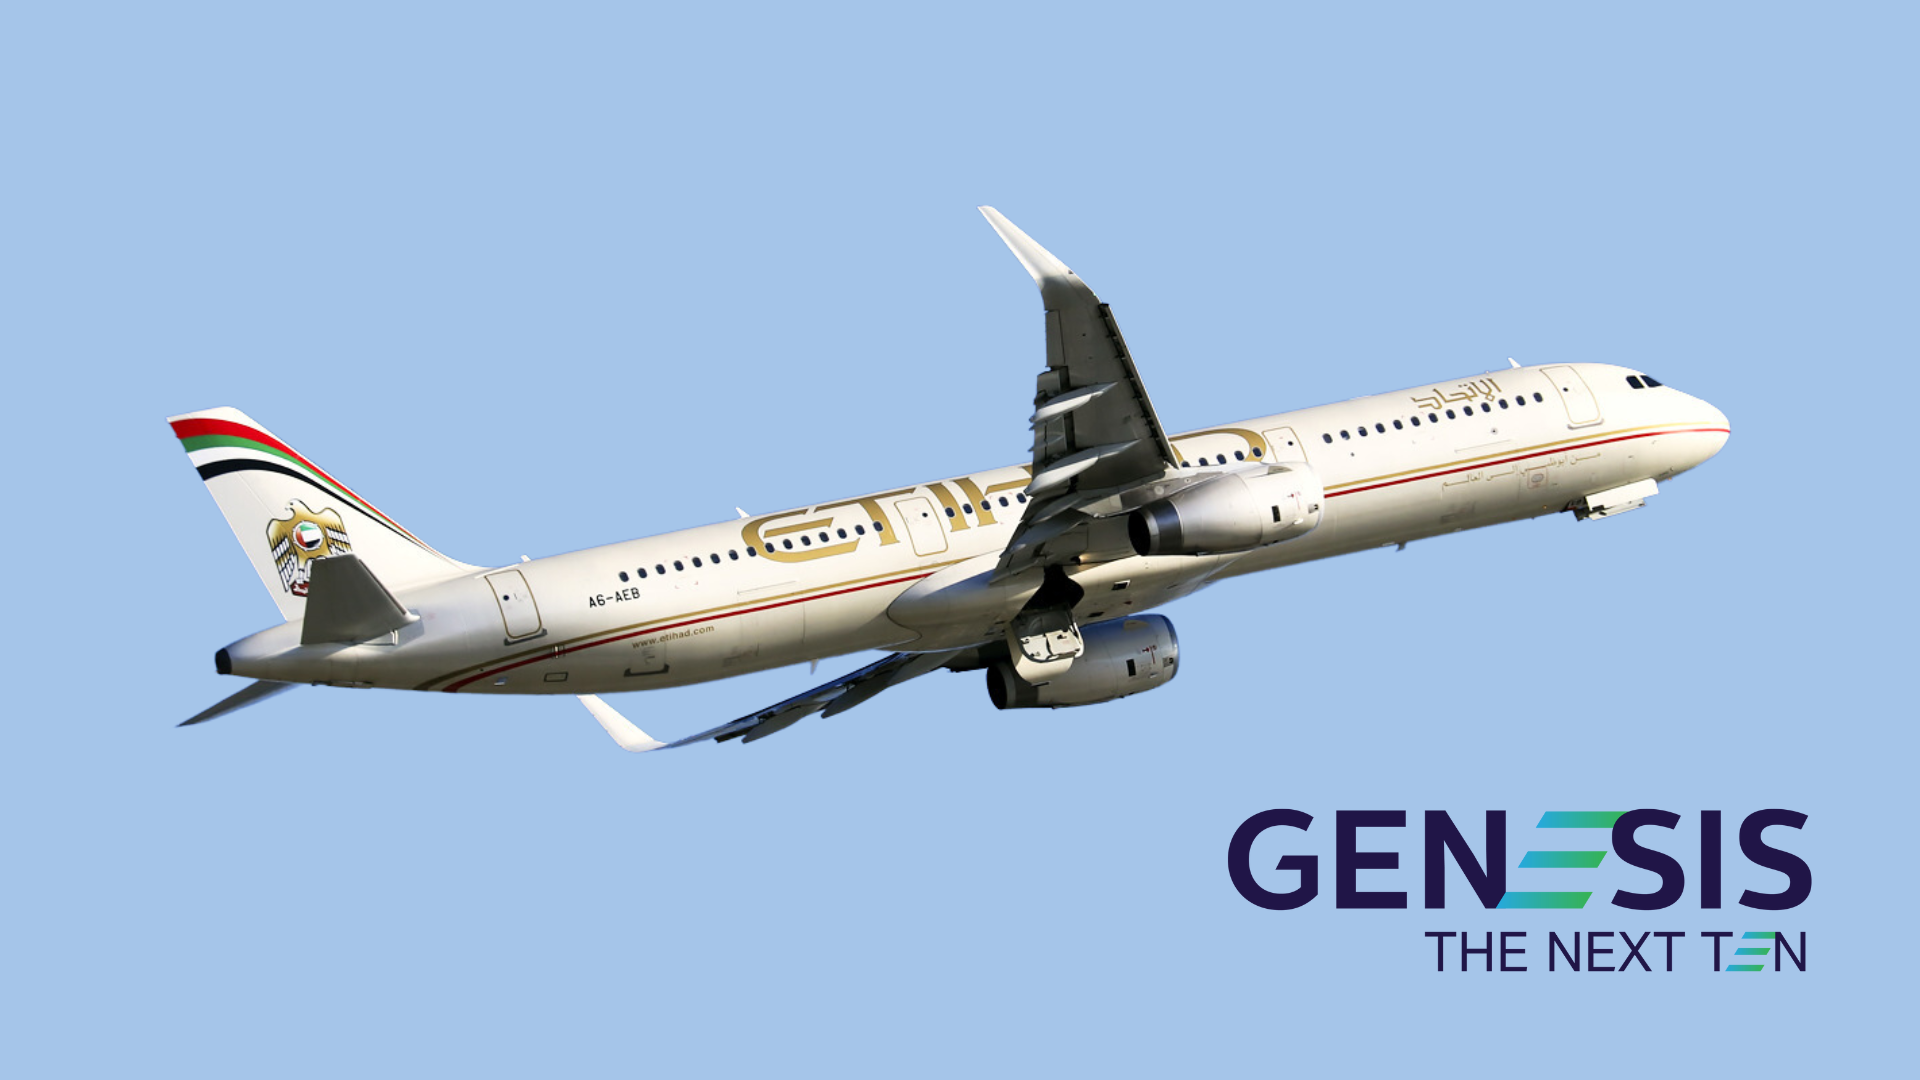 Genesis announces the acquisition of one A321-200 passenger aircraft on lease to Etihad Airways